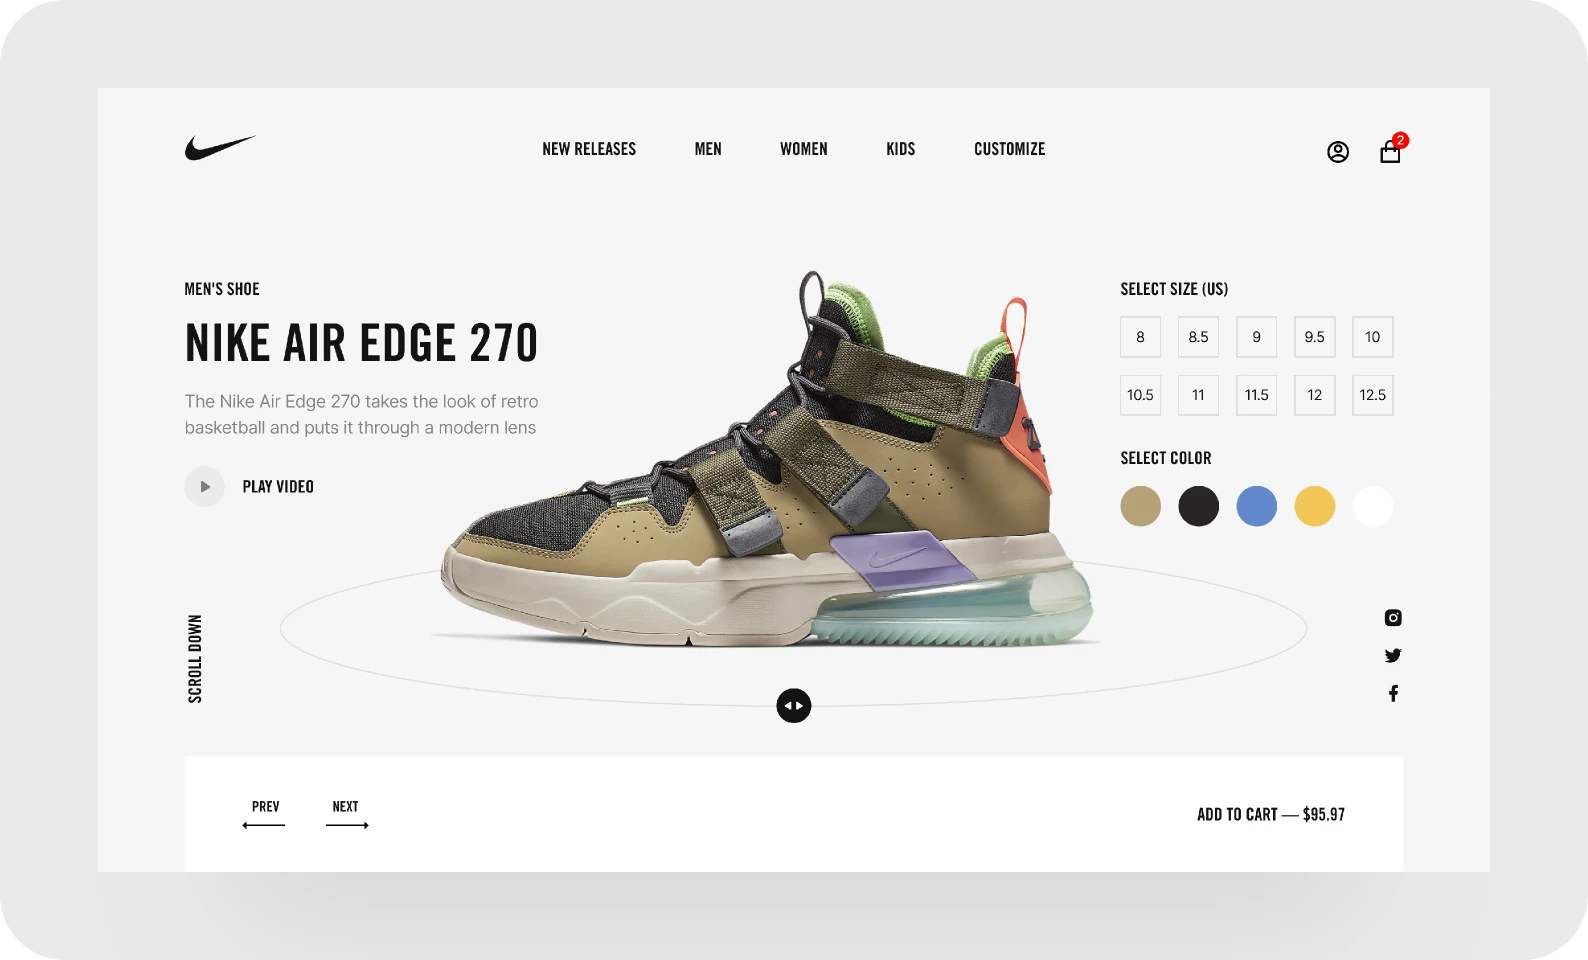 Nike Promo Page Design Concept (2019) for Figma and Adobe XD